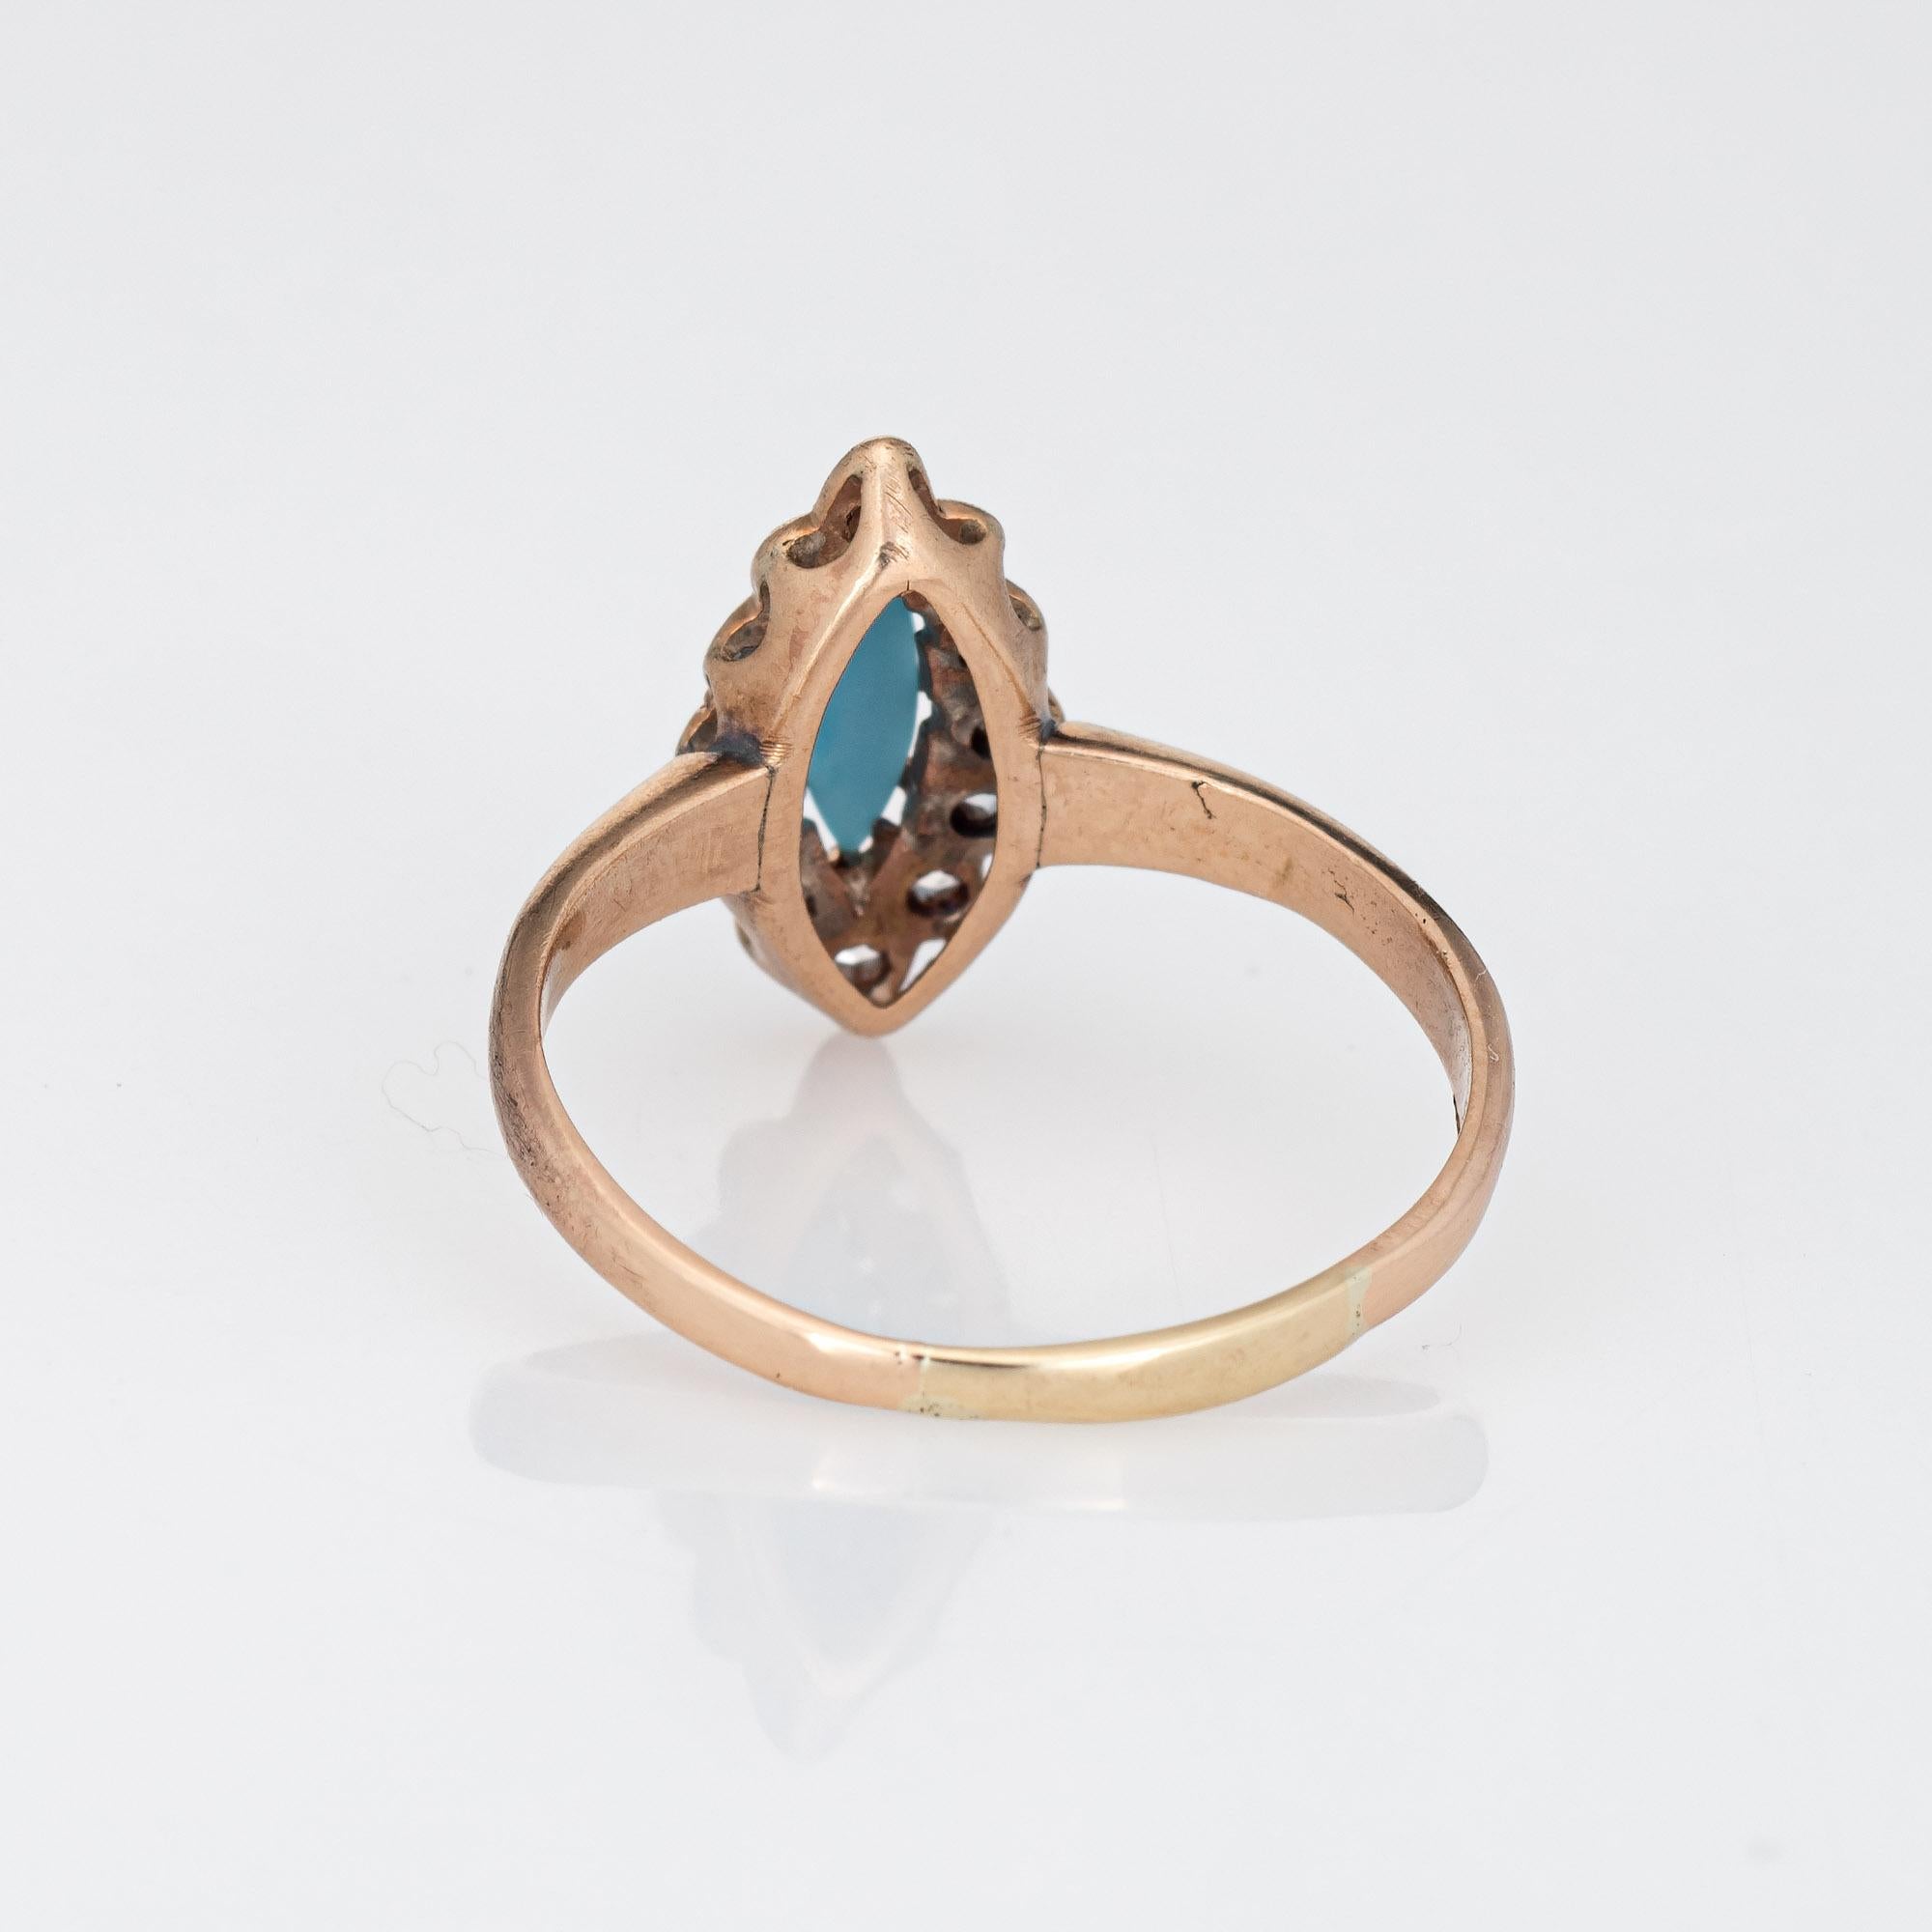 Antique Victorian Navette Ring Old Rose Cut Diamond Turquoise 14k Gold Vintage For Sale 1